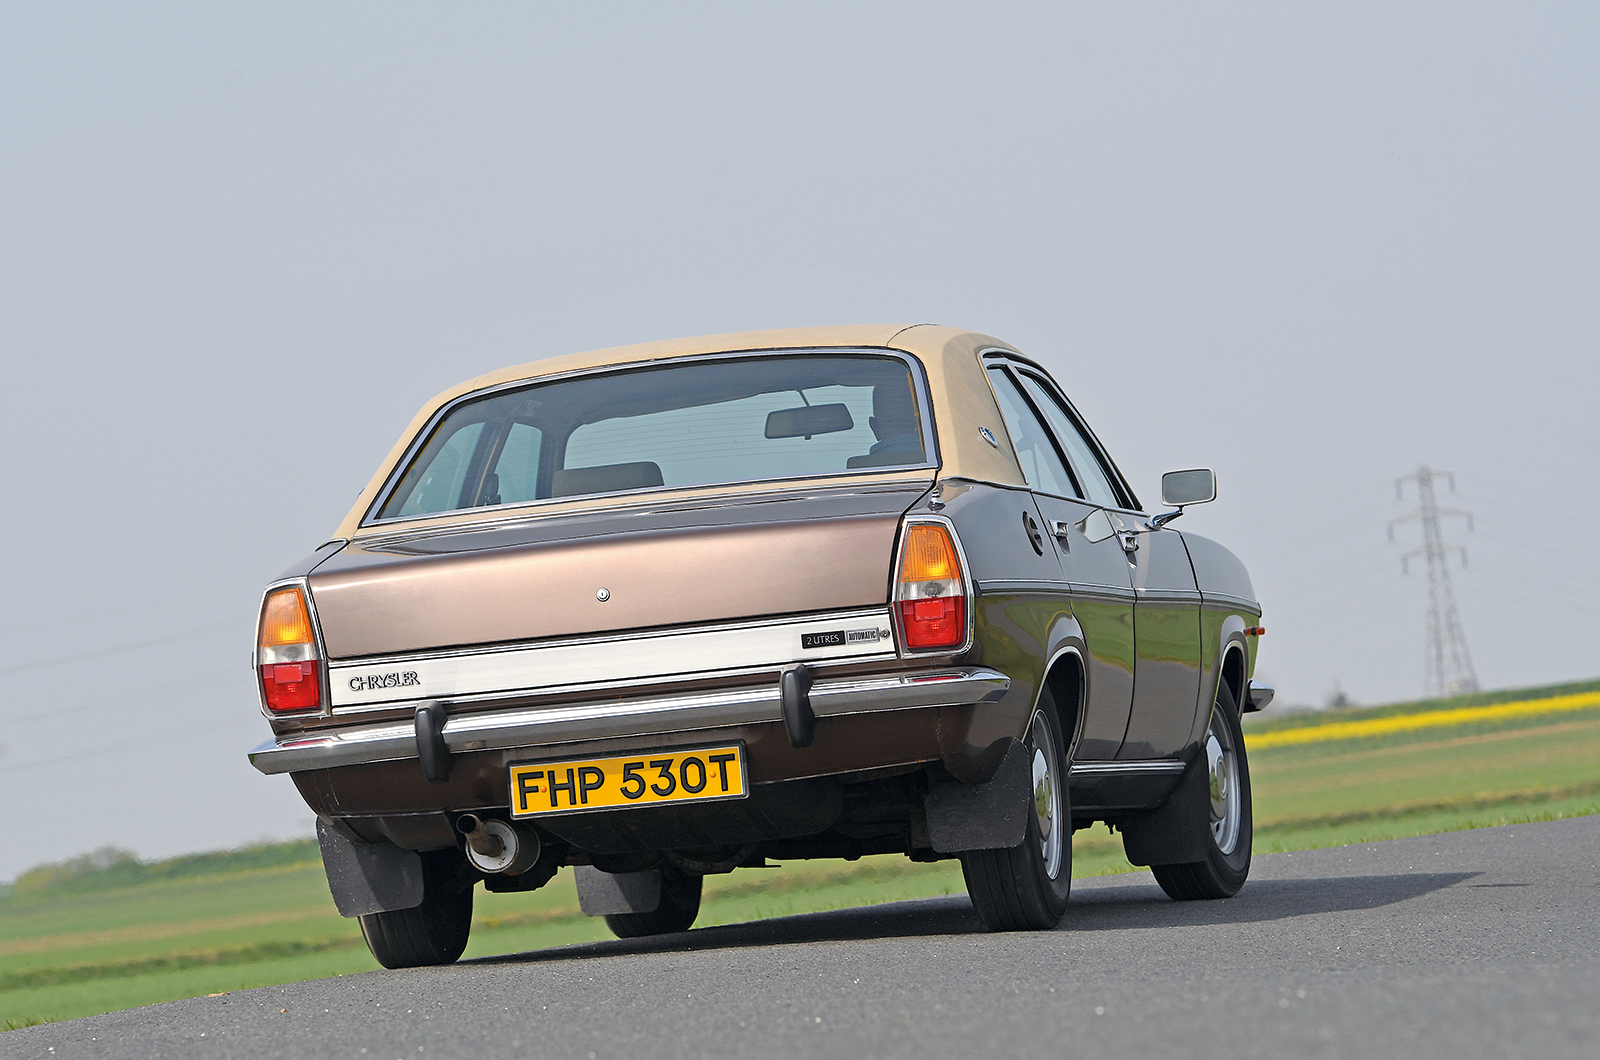 Classic & Sports Car – This is the modern world: Chrysler 2 Litre, Peugeot 504GL & Fiat 132